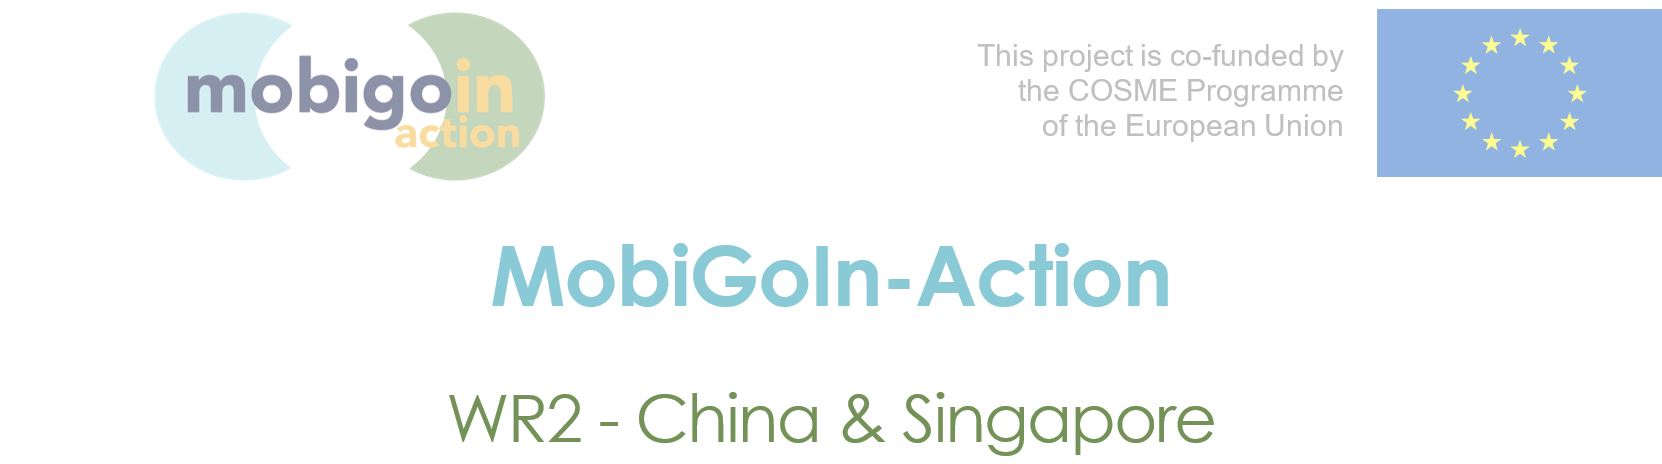 MobiGoIn-Action China and Singapore Acceleration Program and Mission